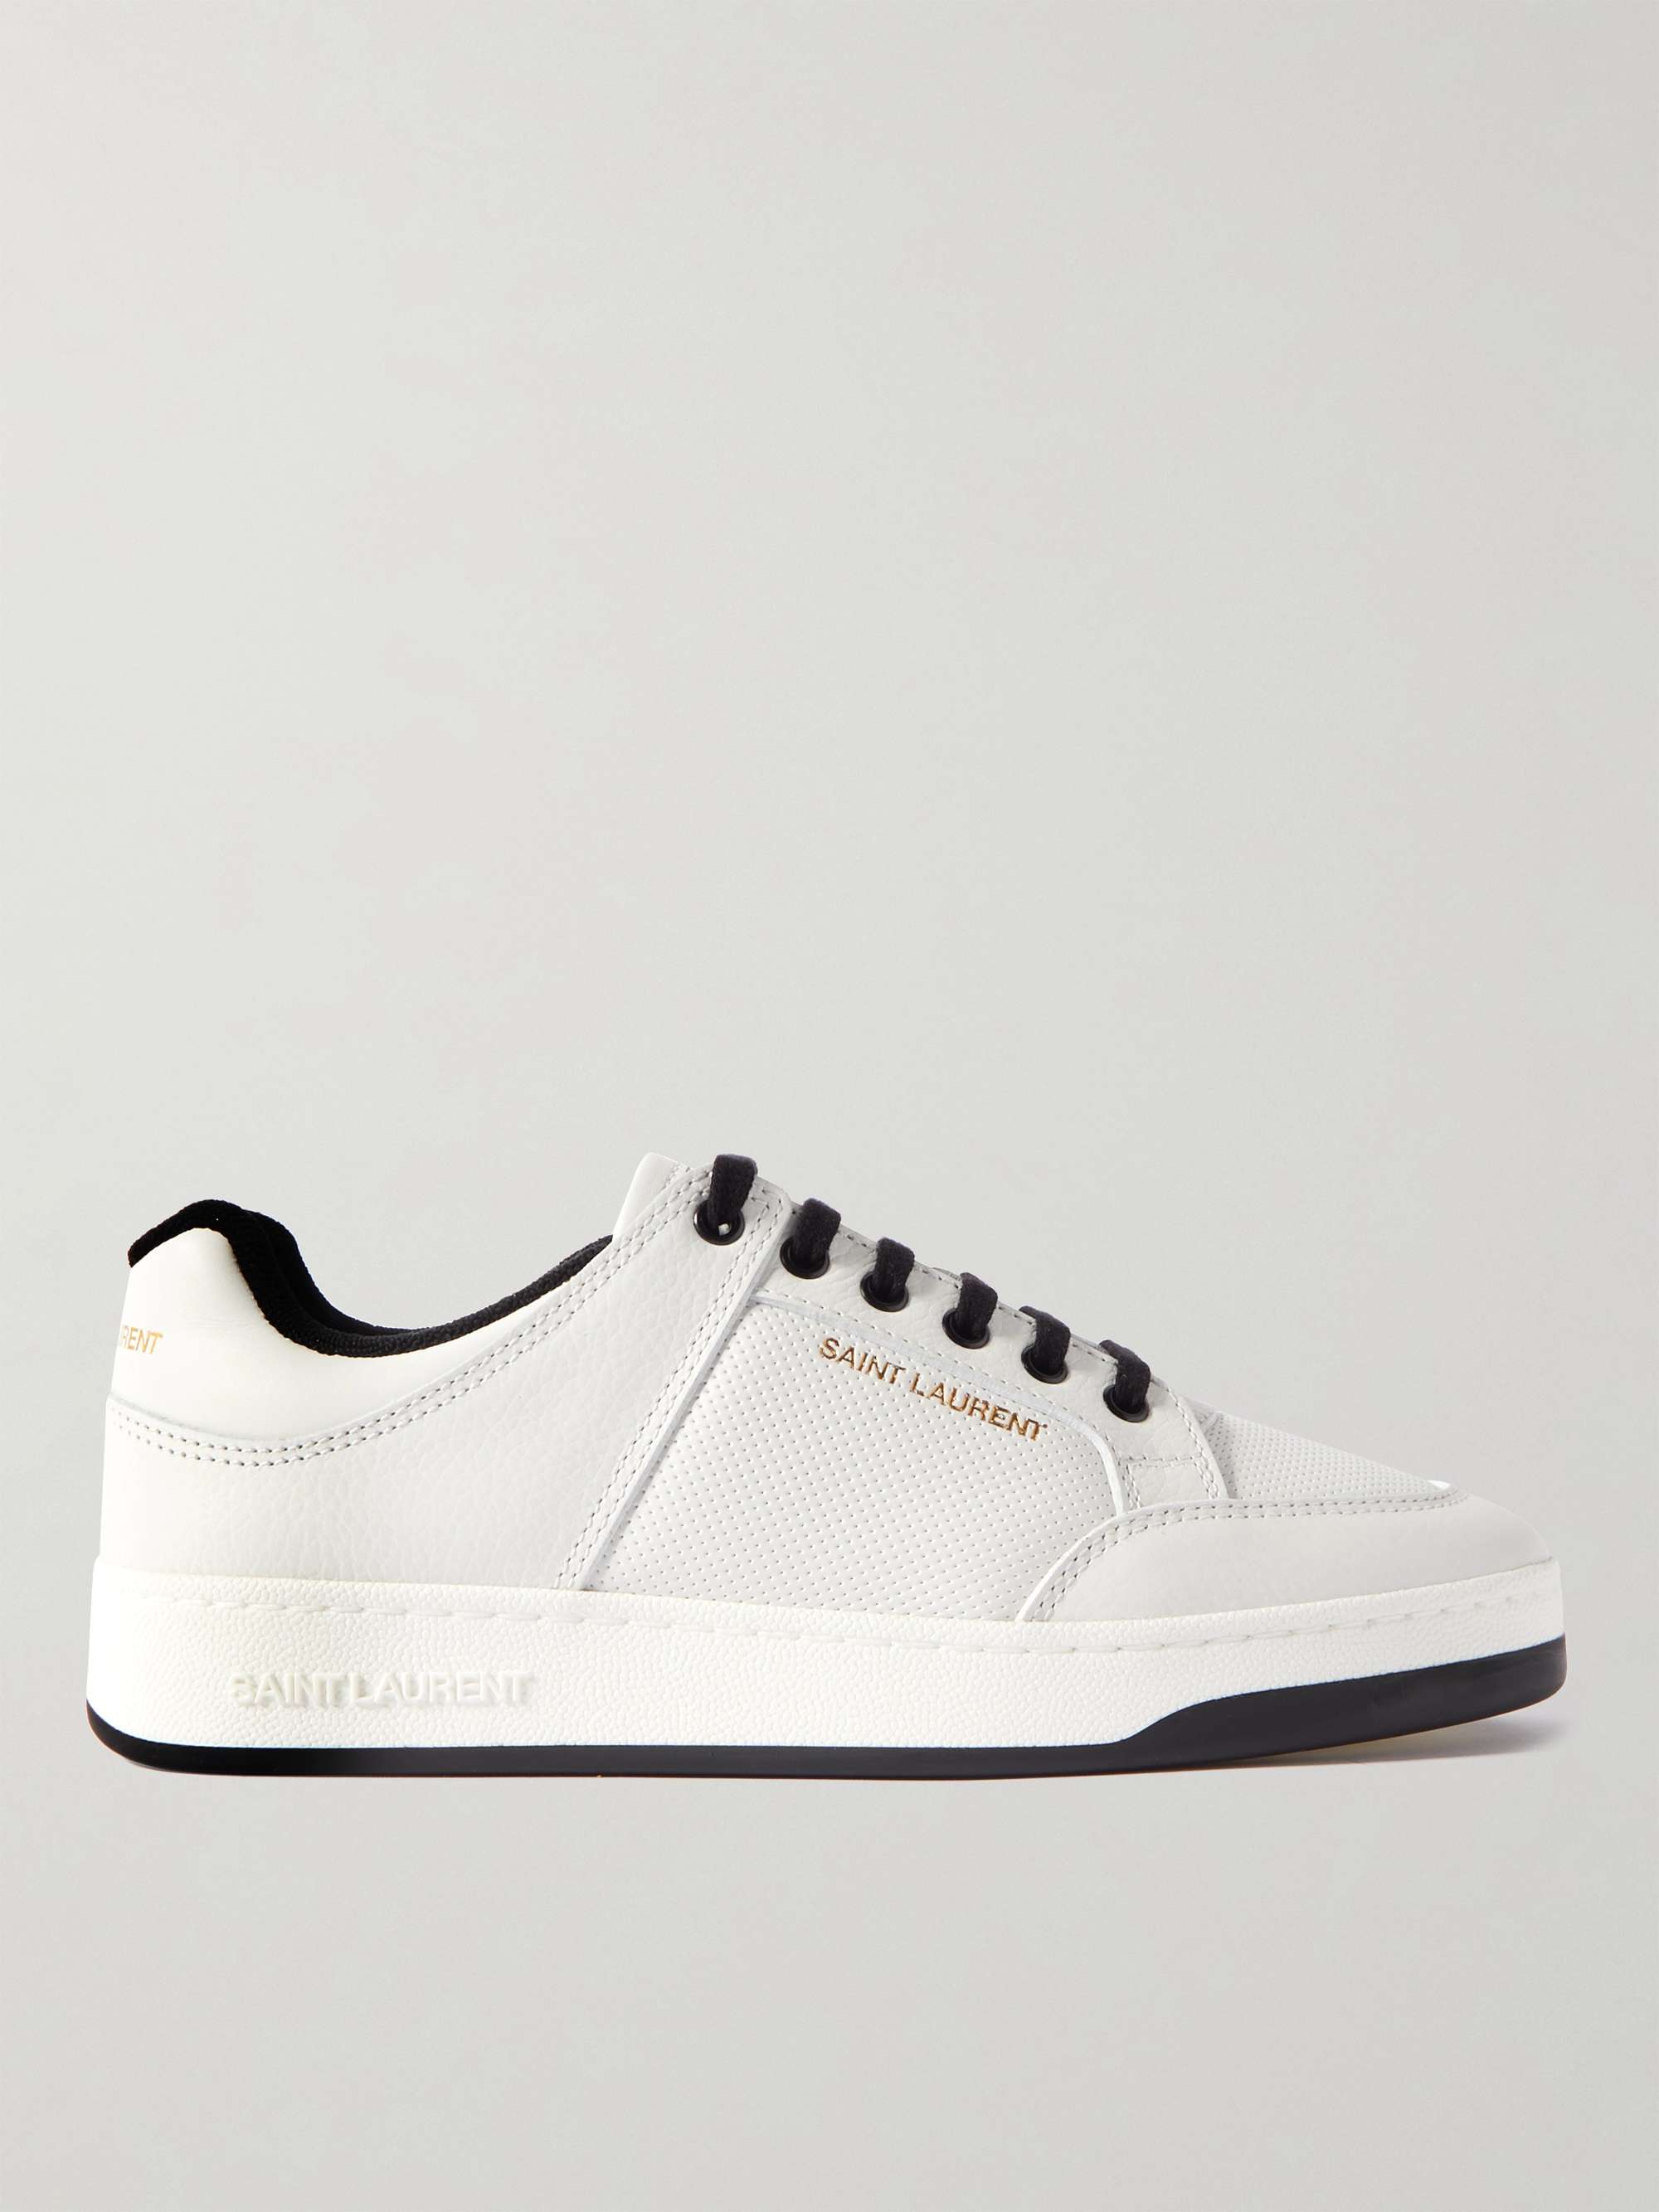 White SL/61 Perforated Leather Sneakers | SAINT LAURENT | MR PORTER